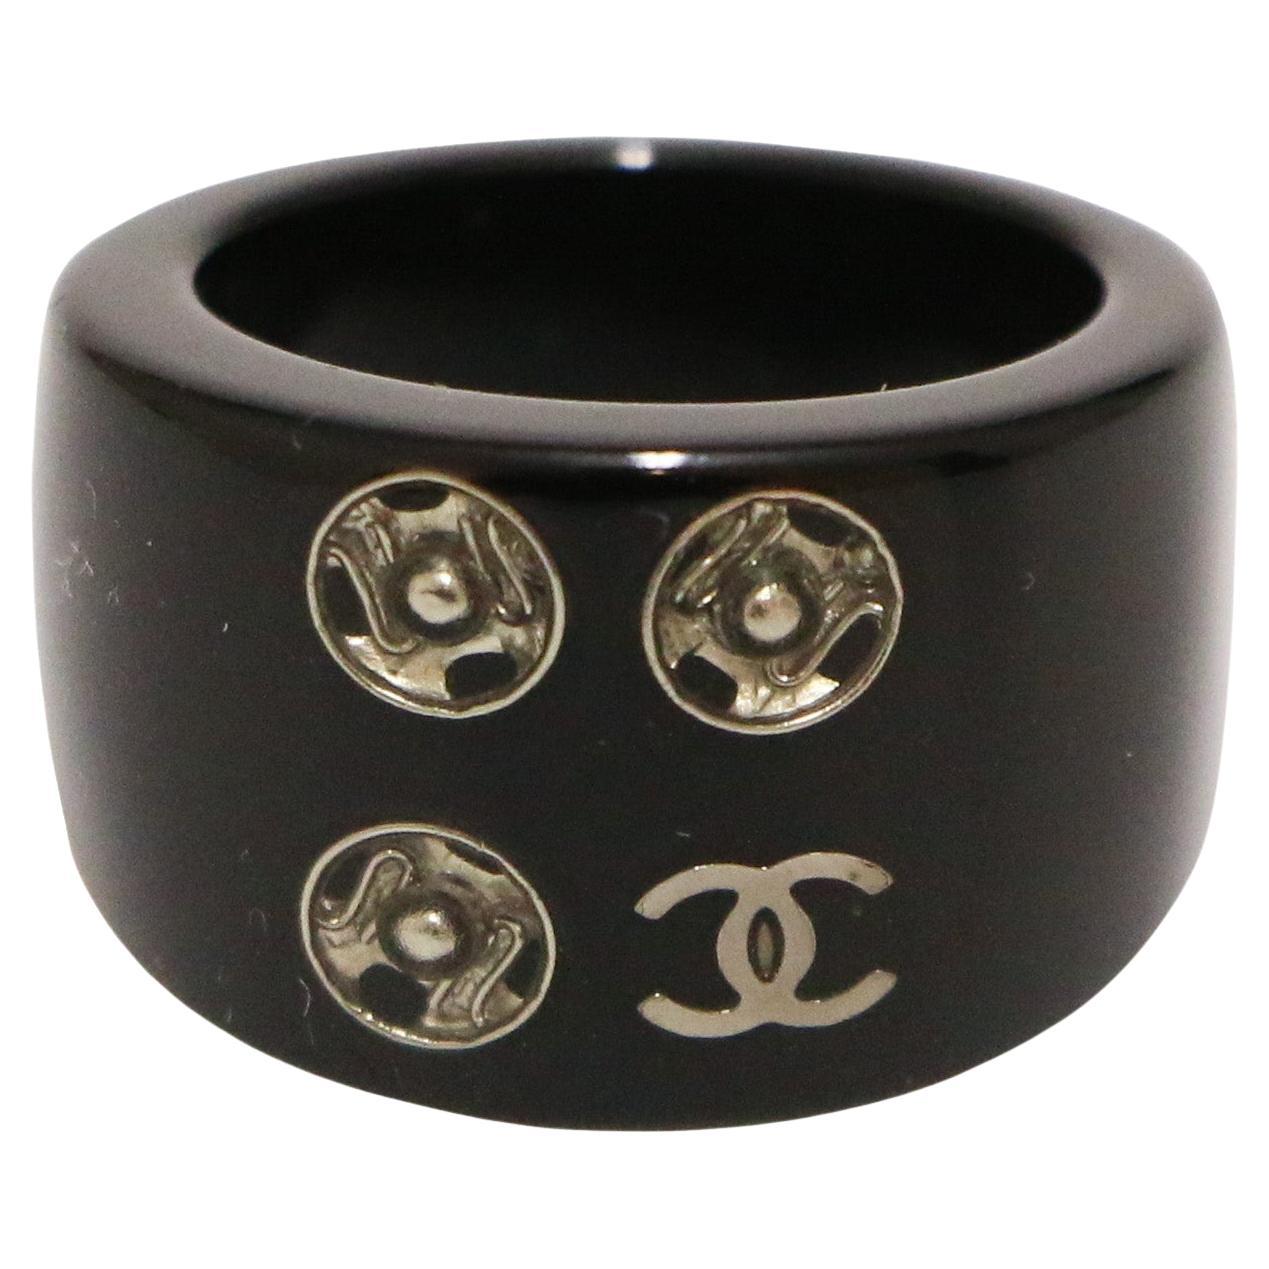 Black Chanel Ring size 54